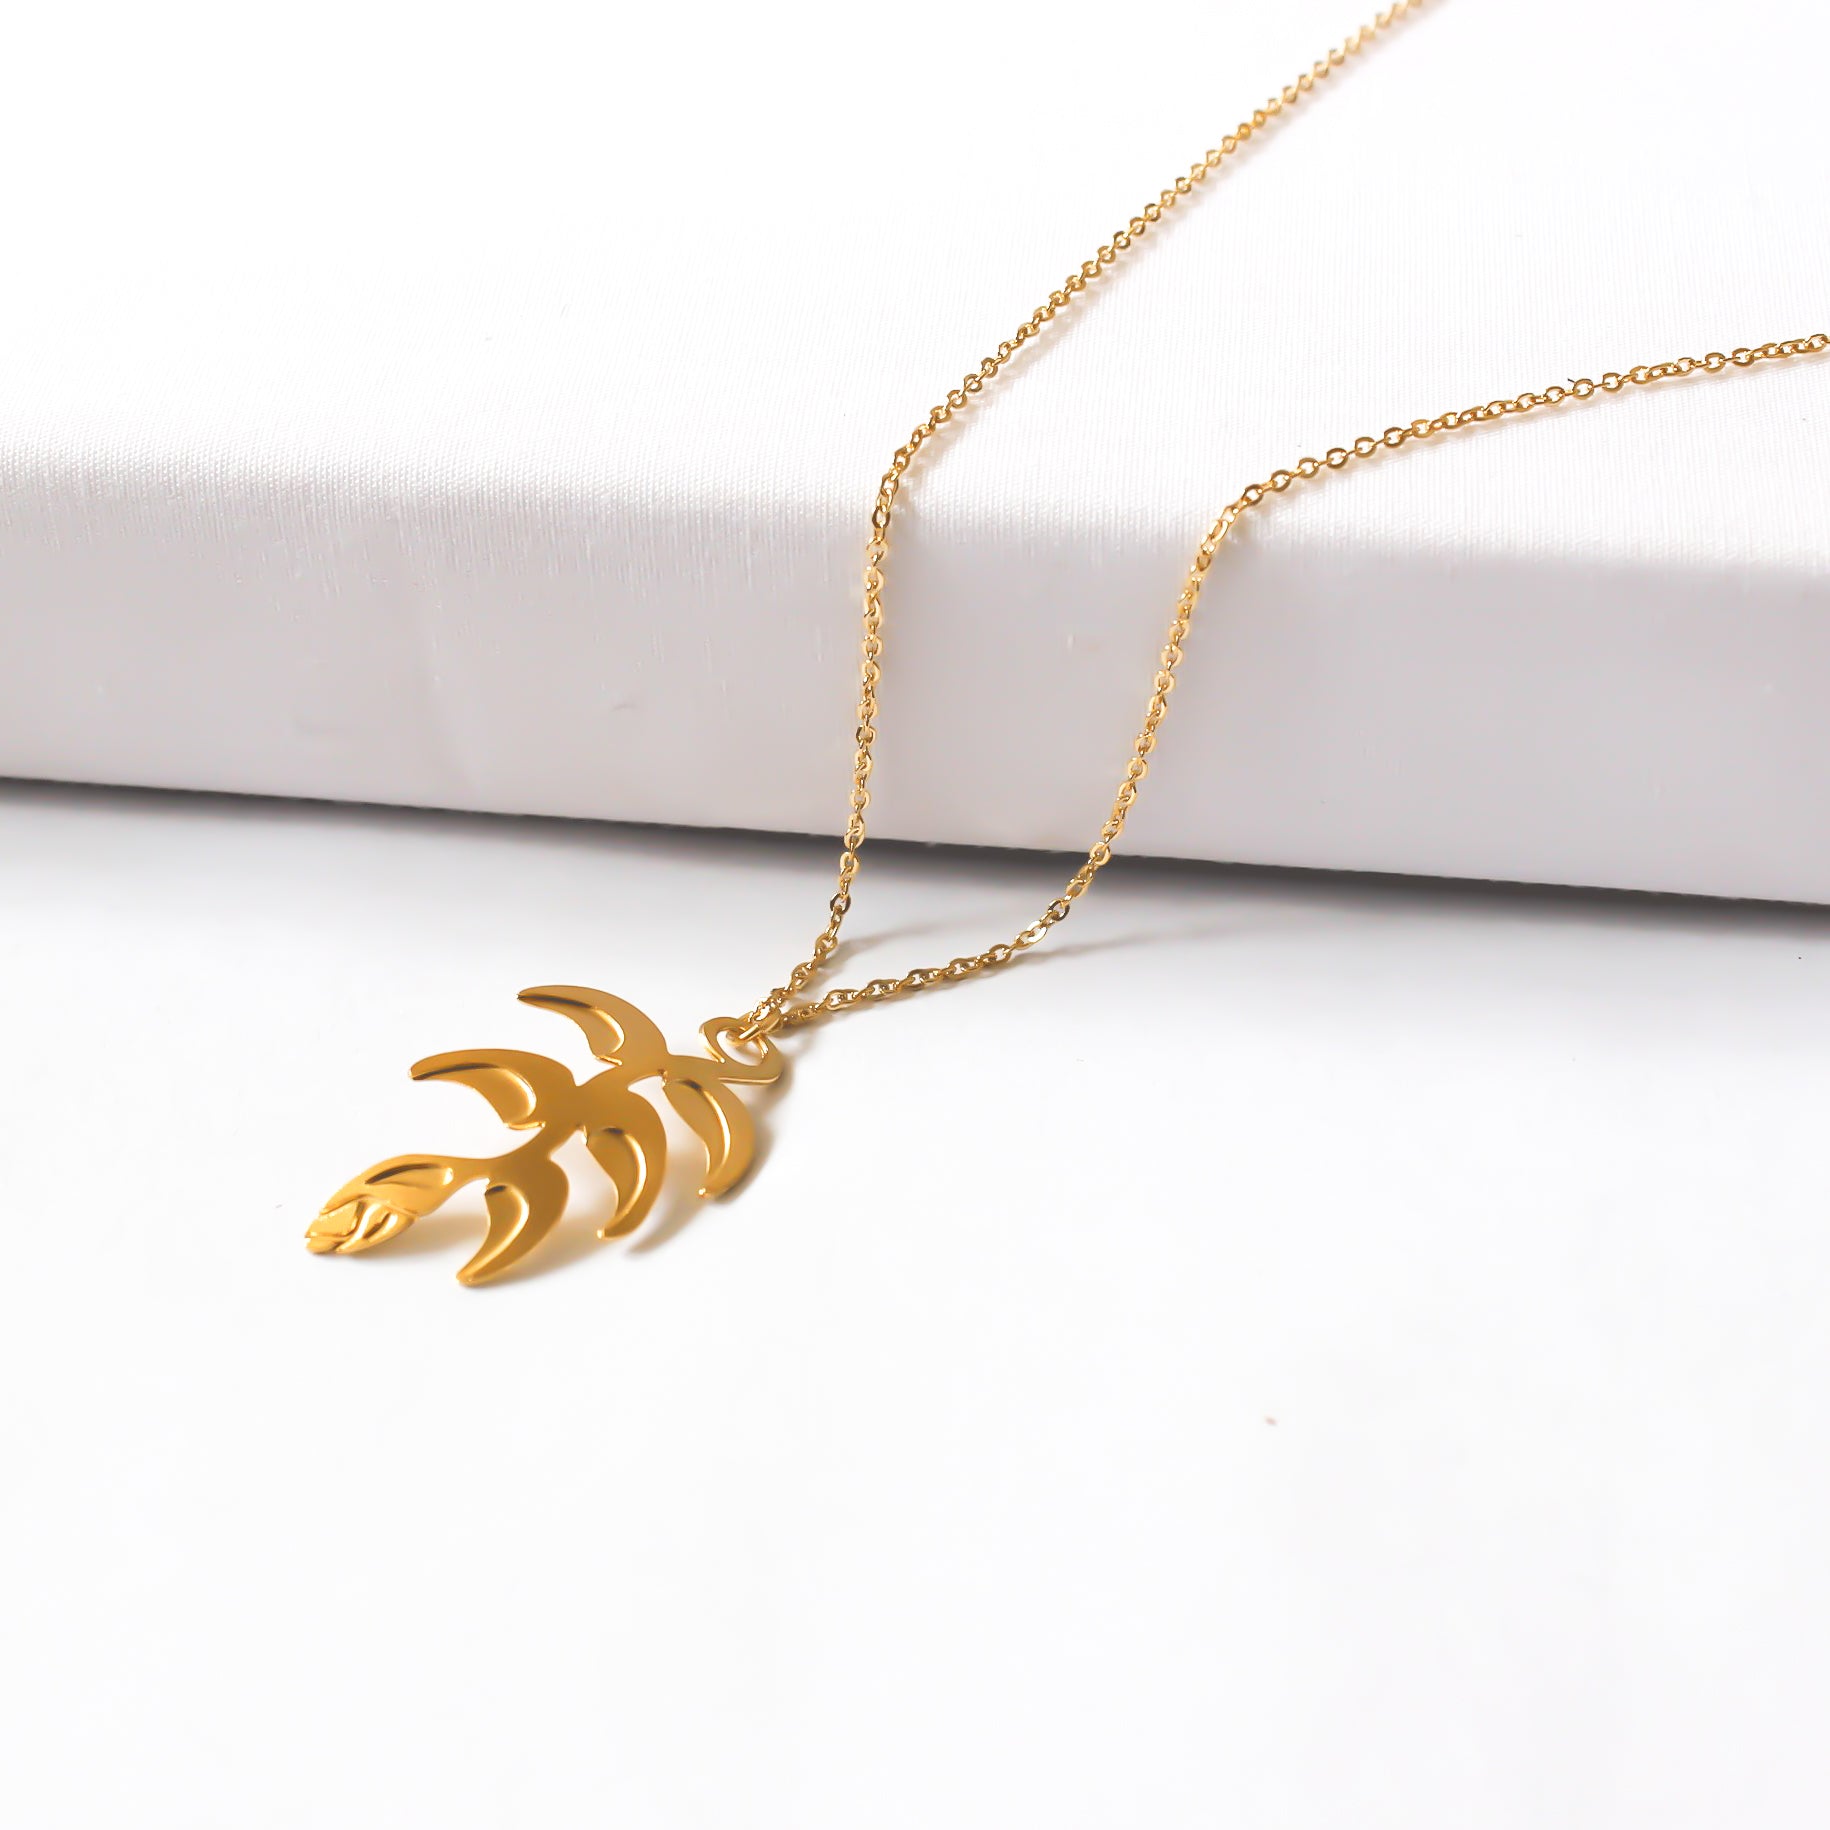 Heliconia Necklace